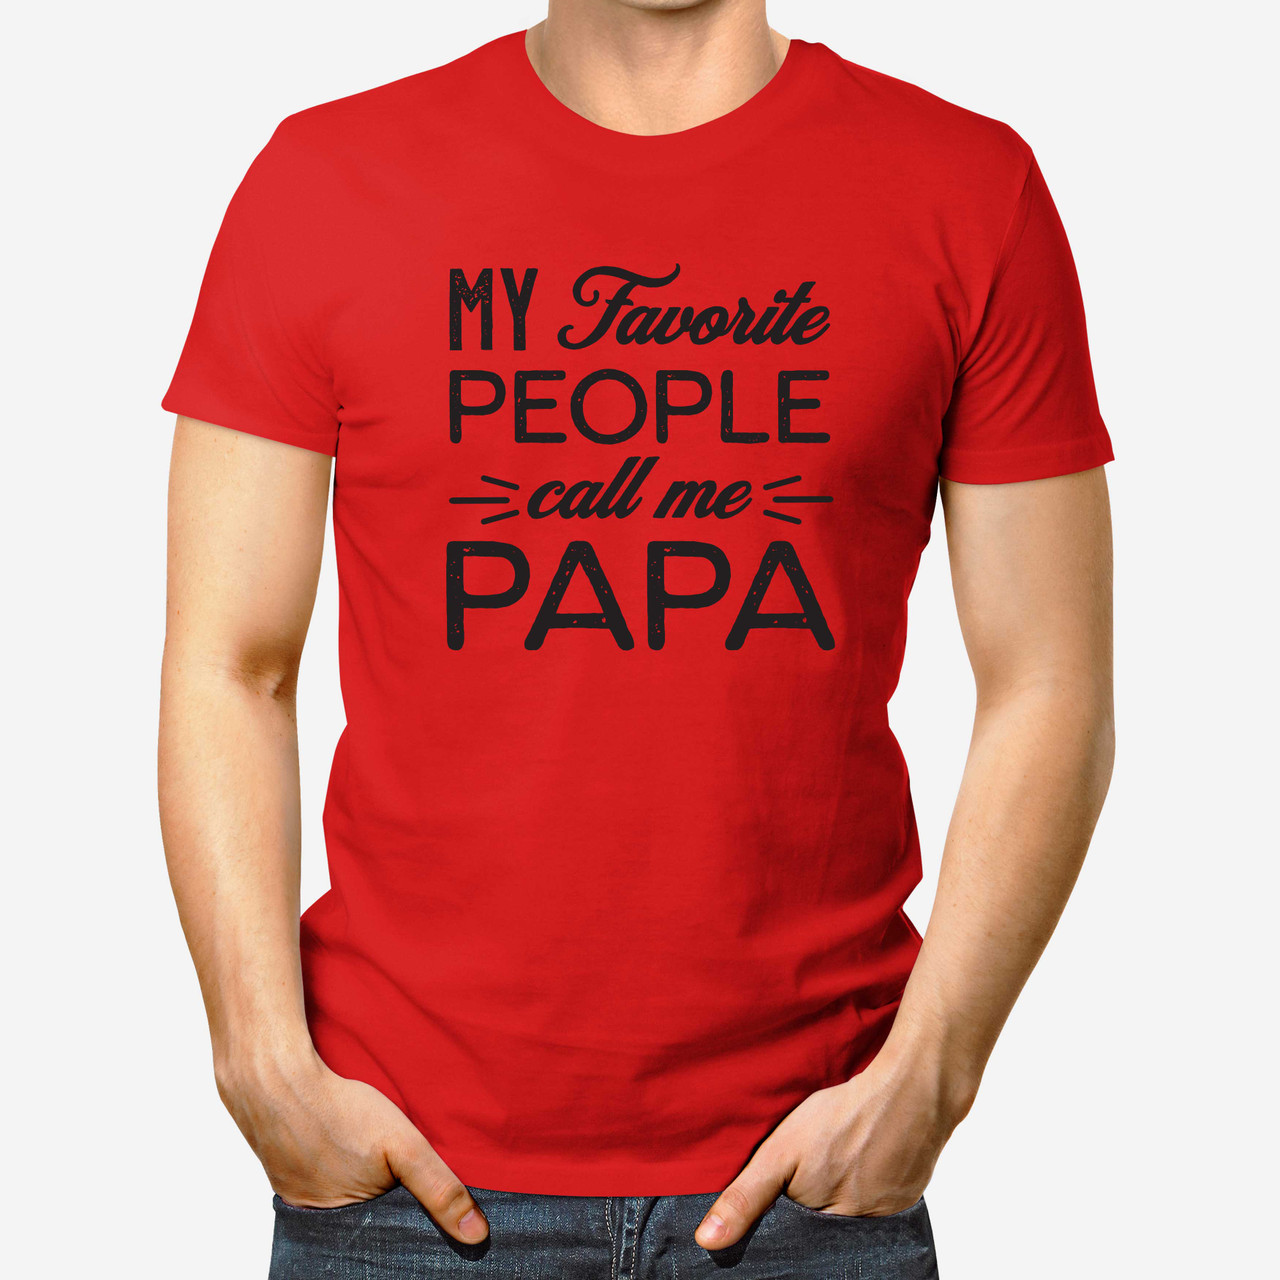 https://cdn11.bigcommerce.com/s-5grzuu6/images/stencil/1280x1280/products/4062/34327/My-Favorite-People-Call-Me-Papa-Red__10284.1683933873.jpg?c=2